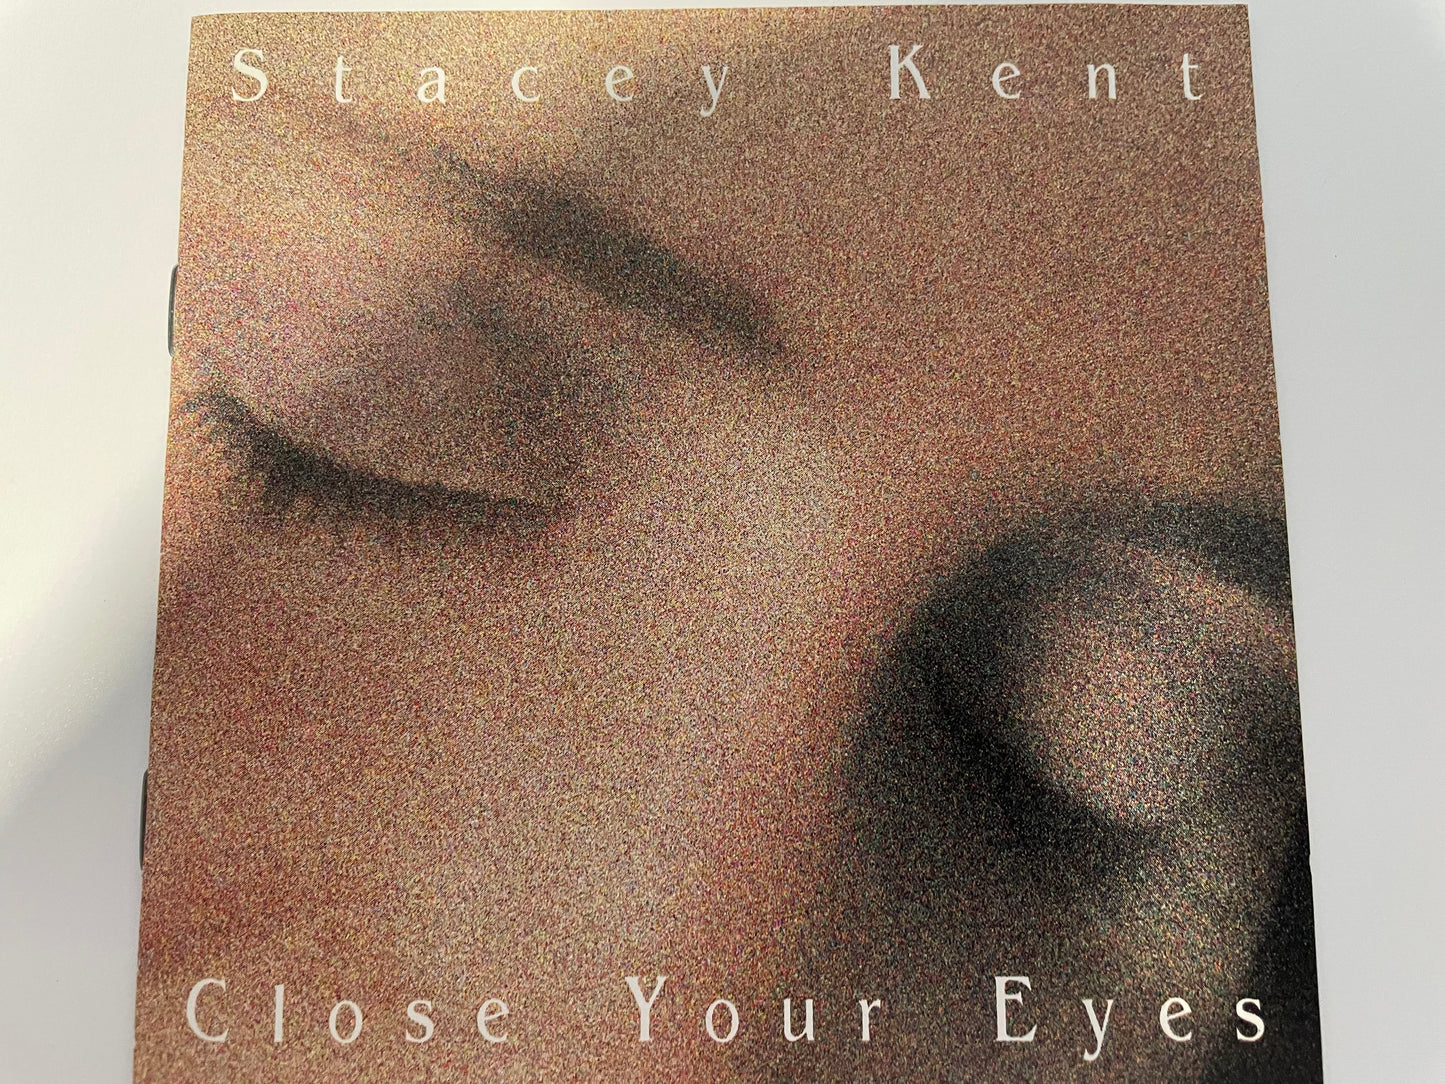 STACEY KENT "CLOSE YOUR EYES"-$3.99 +SHIPPING $5.00